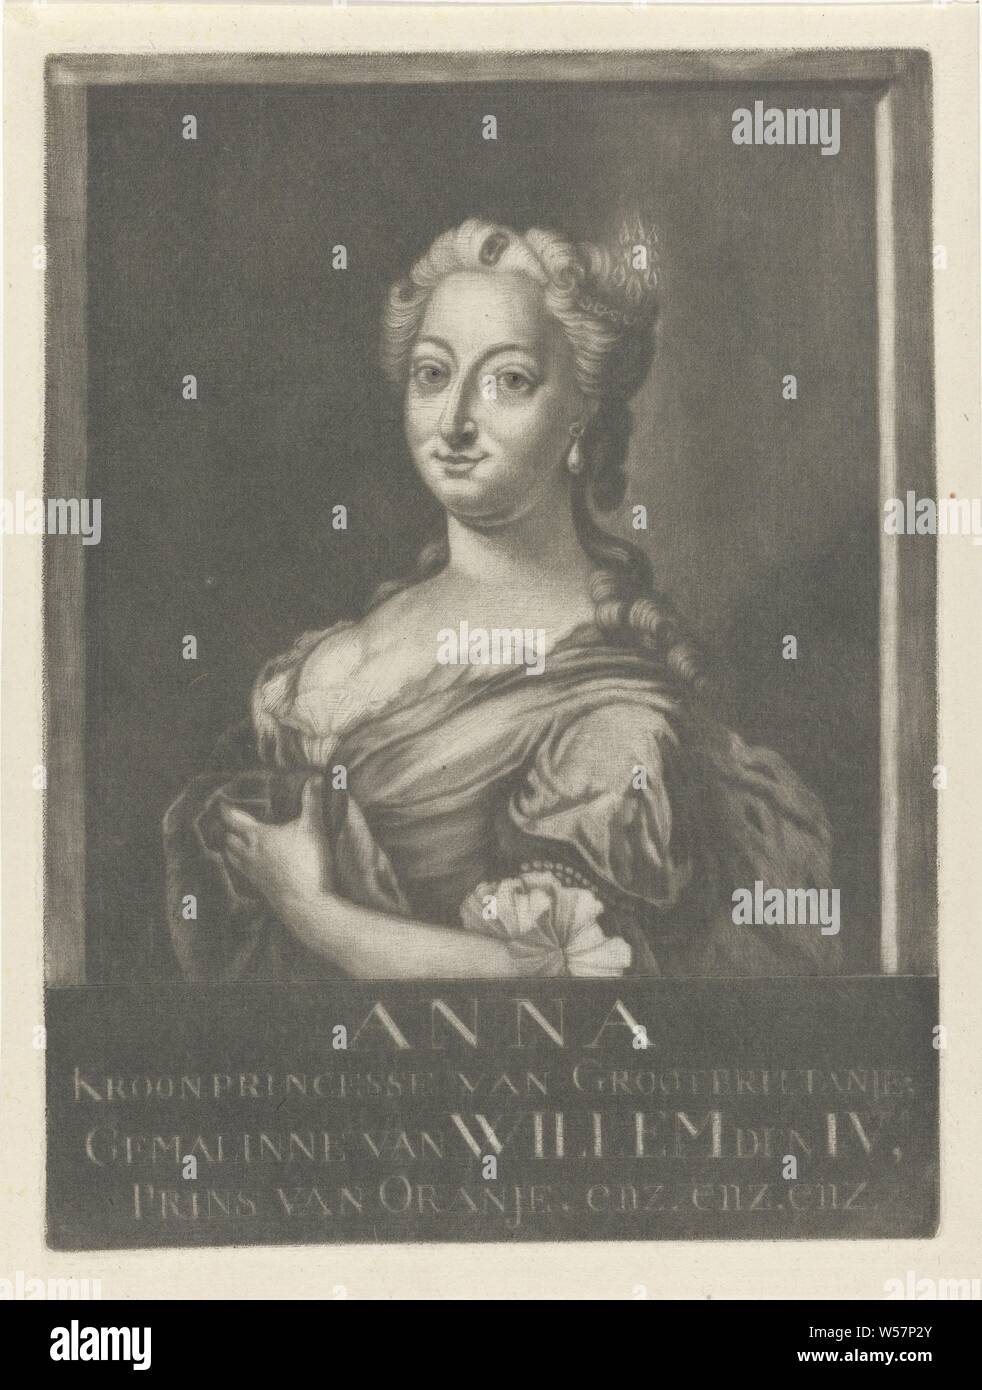 Portrait of Anna van Hannover, Anna van Hannover, wife of Willem IV of Oranje-Nassau. She is wearing pearl earrings., Rienk Jelgerhuis, Leeuwarden, 1770, paper, h 220 mm × w 165 mm Stock Photo